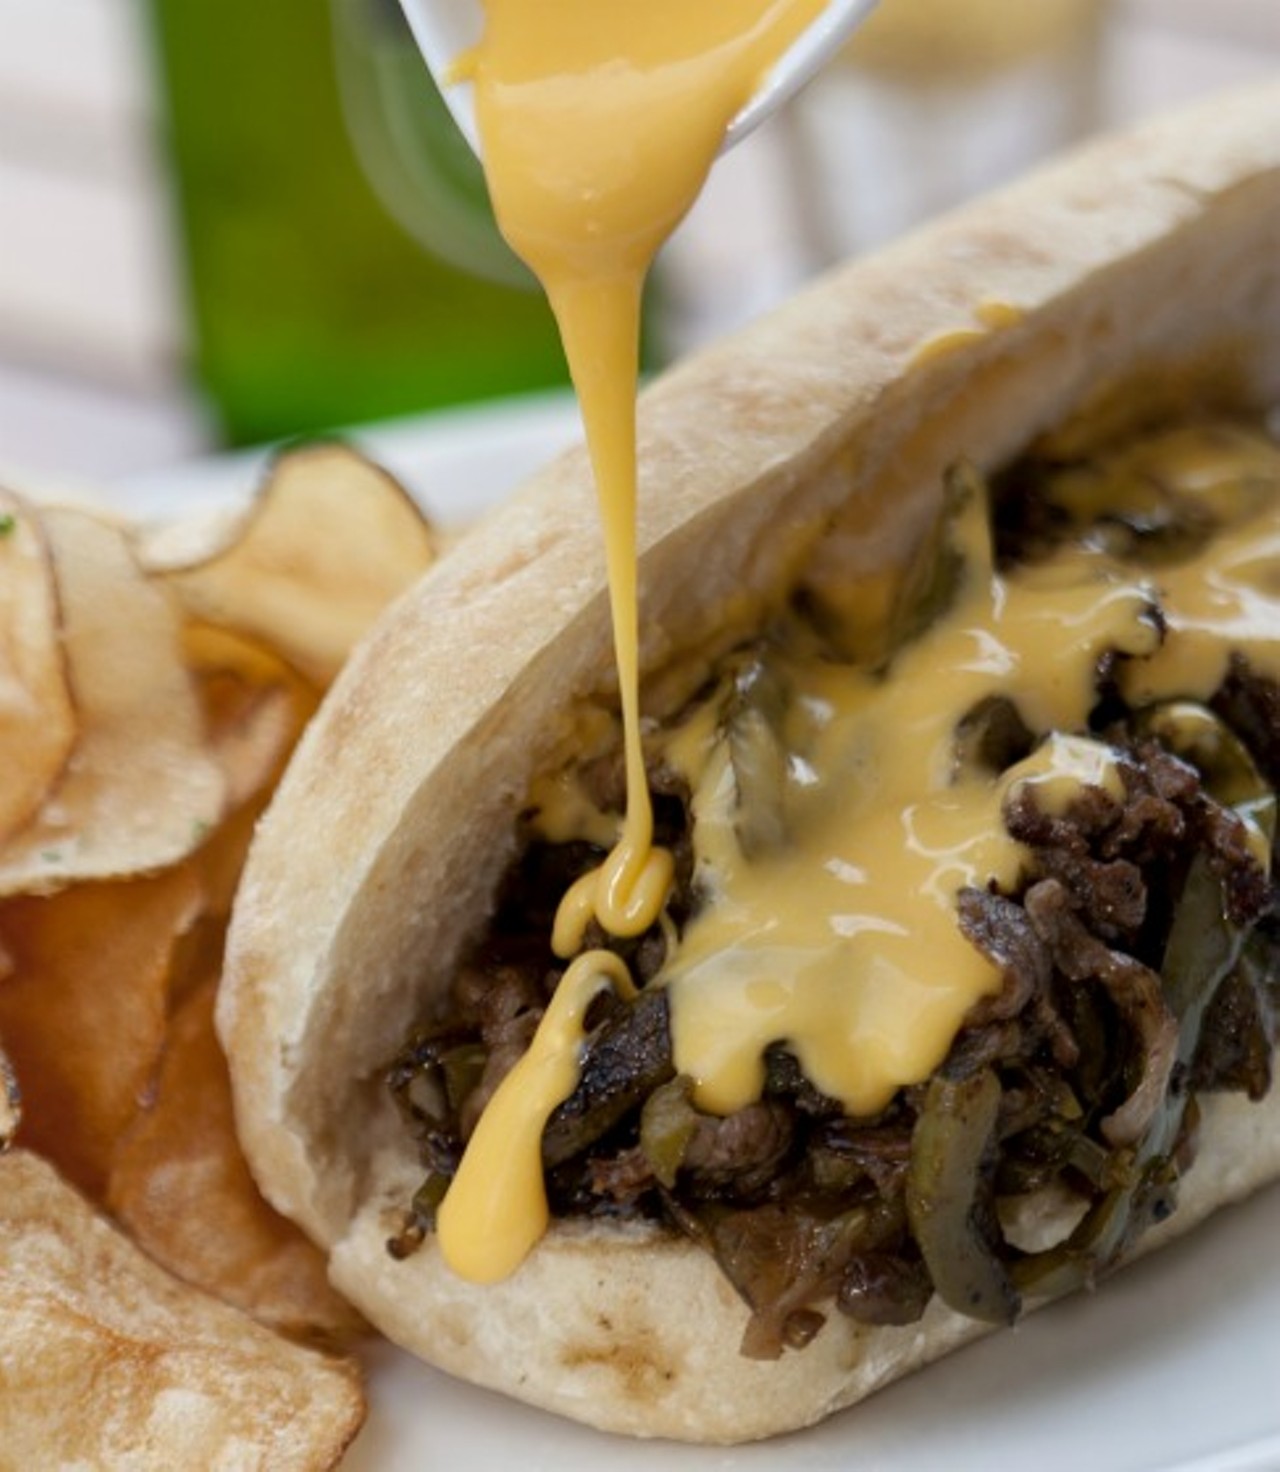 Steak can be good for hangovers. 
The ultimate guilty pleasure sandwich, this decadence is served by chef Jason Smith in a nod to Philly native and restaurateur Stephen Starr of Steak 954 in Fort Lauderdale, Florida.